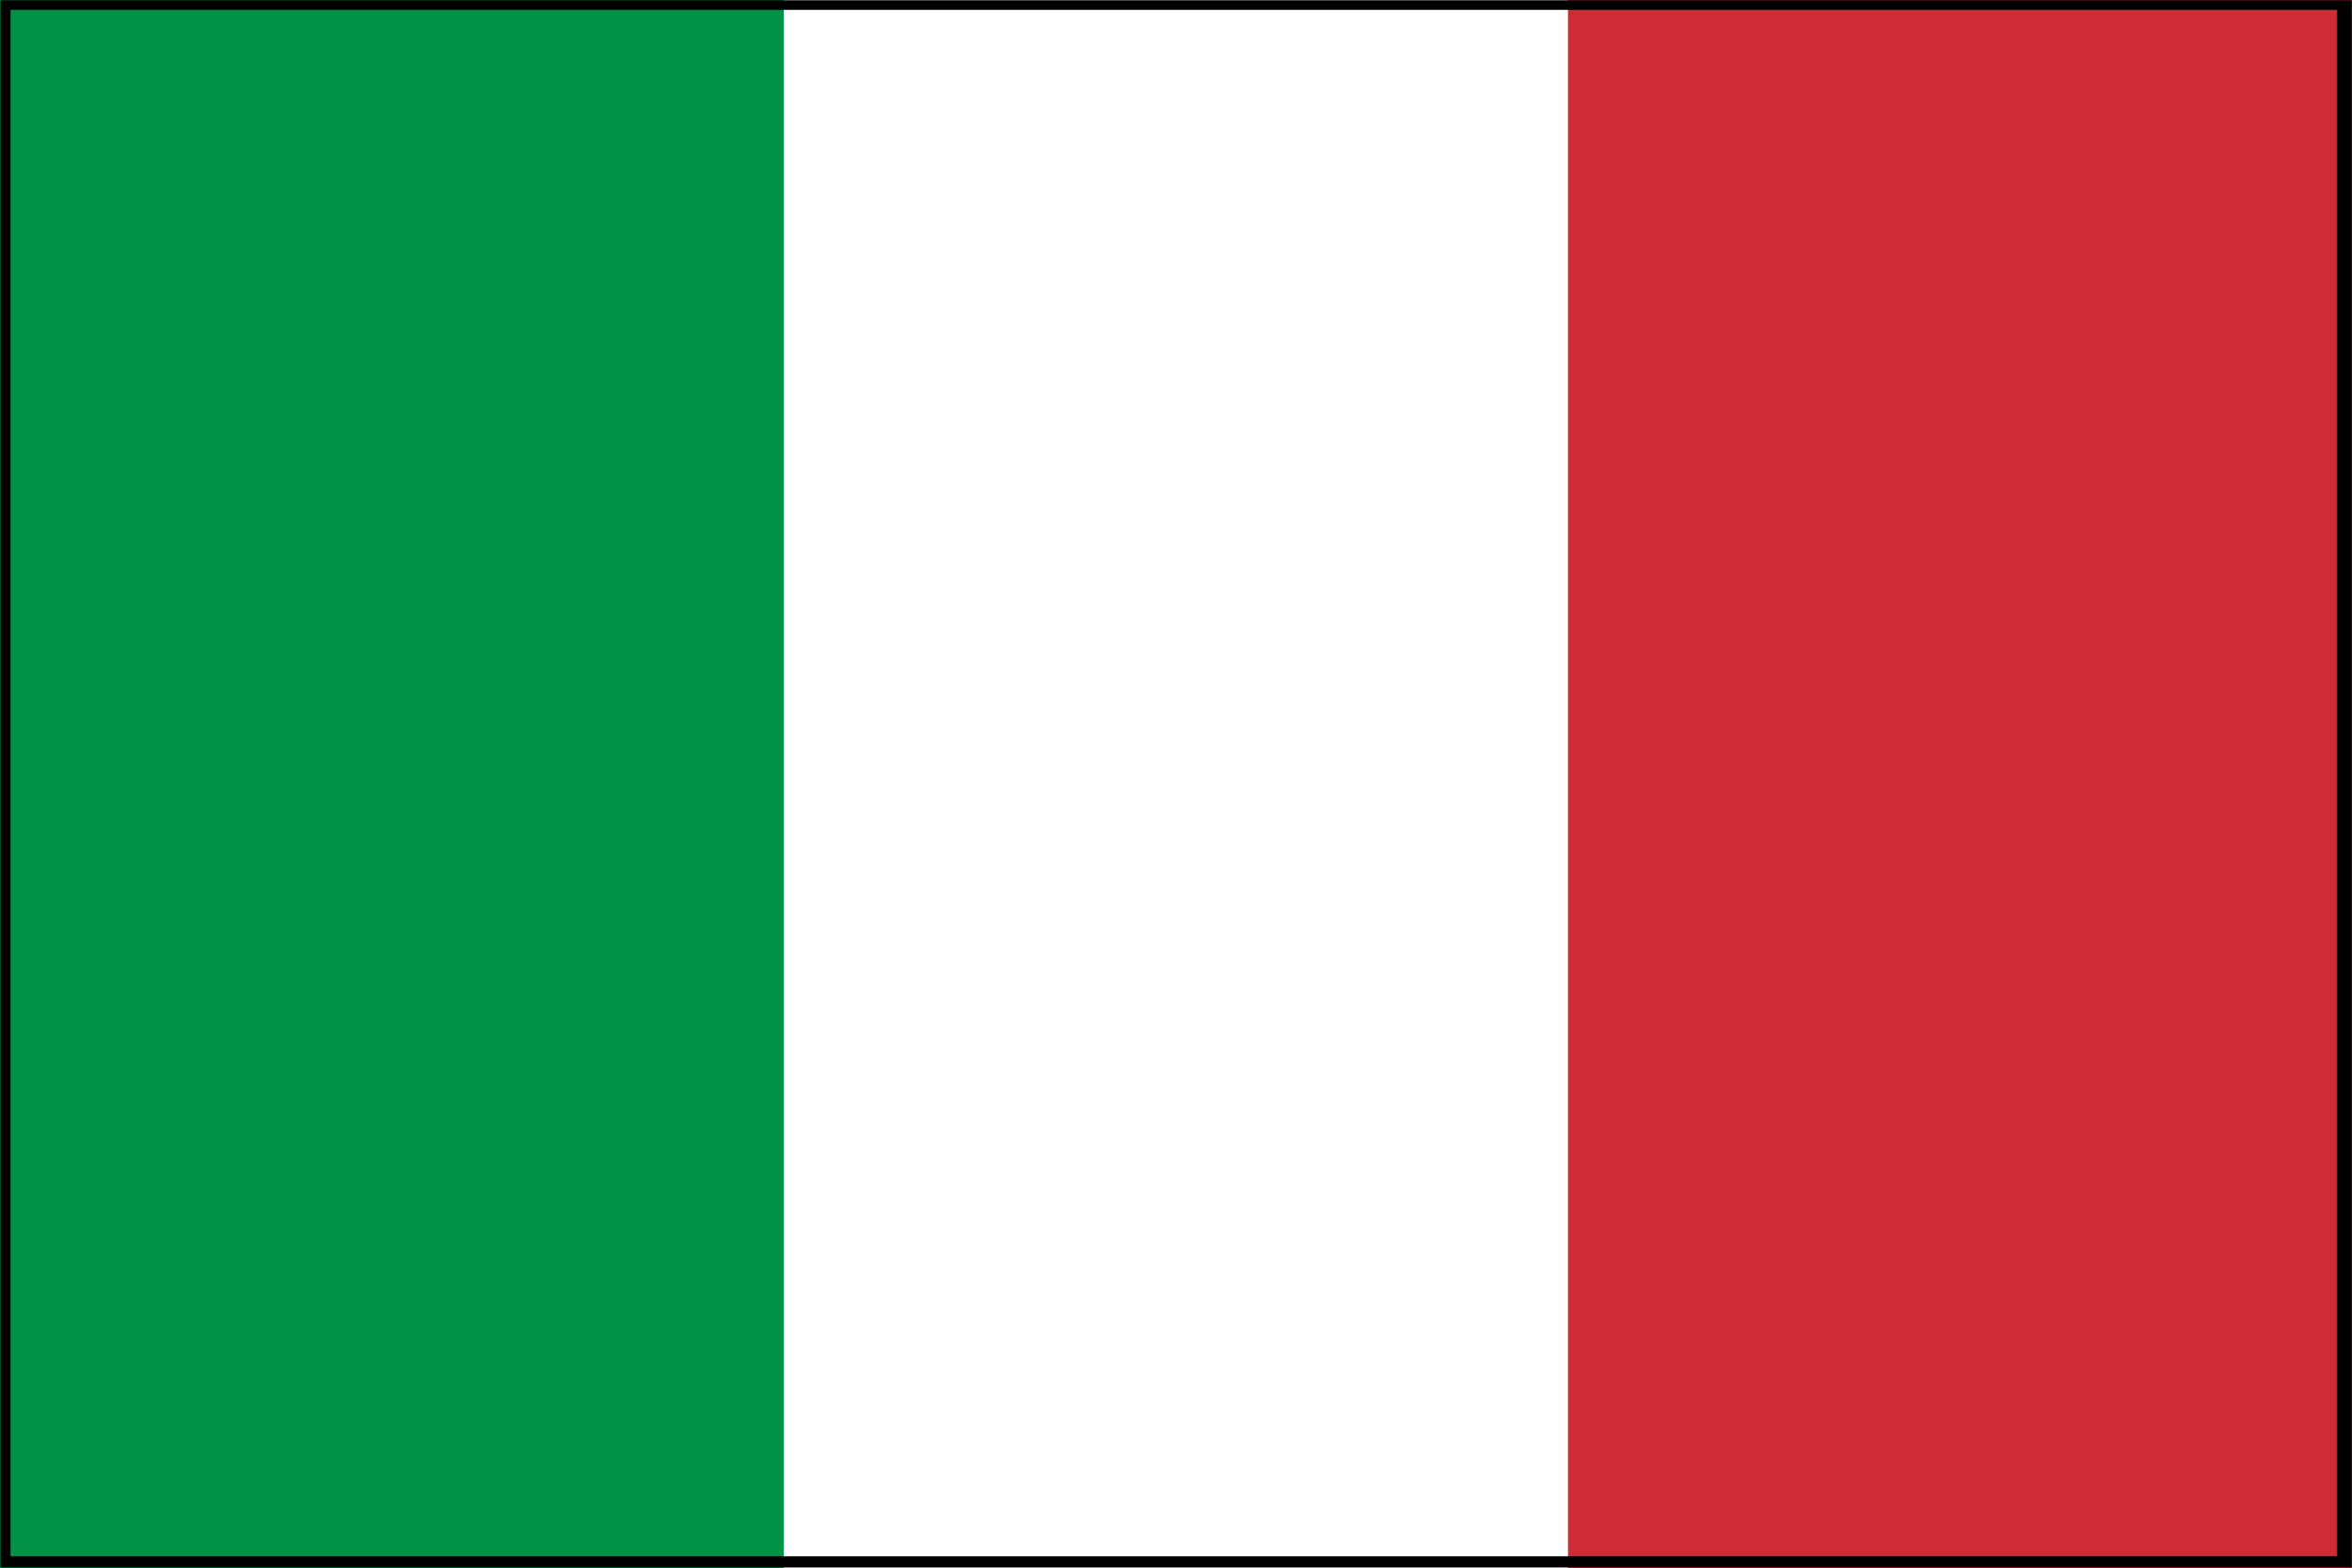 Flag of Italy with green, white, and red vertical stripes